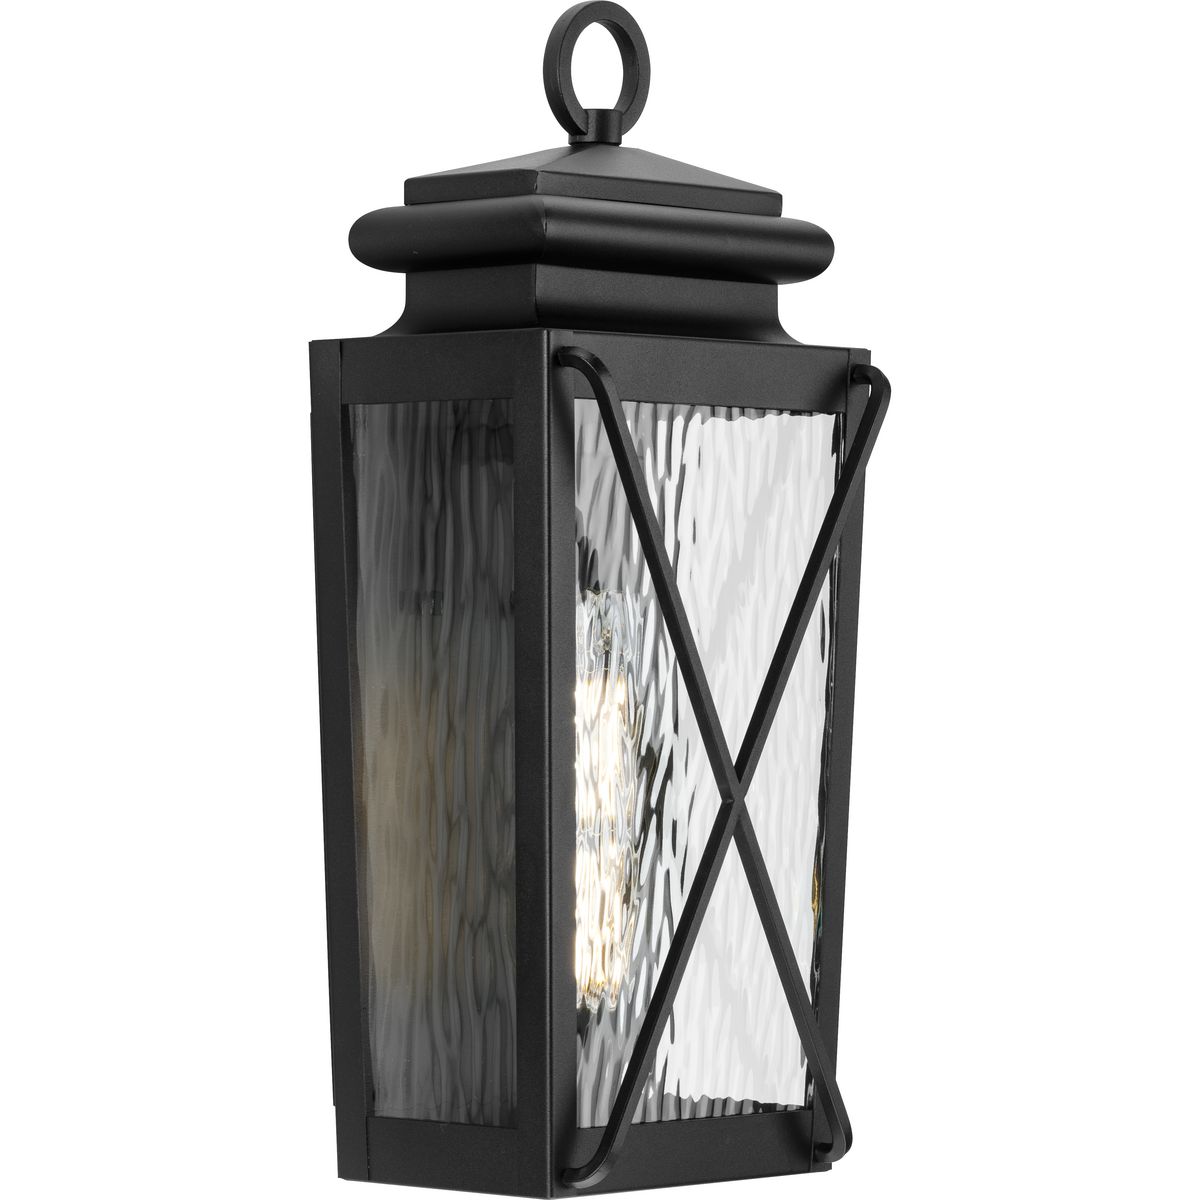 Wakeford One-Light Textured Black Transitional Outdoor Small Wall Lantern - Wet Location Listed